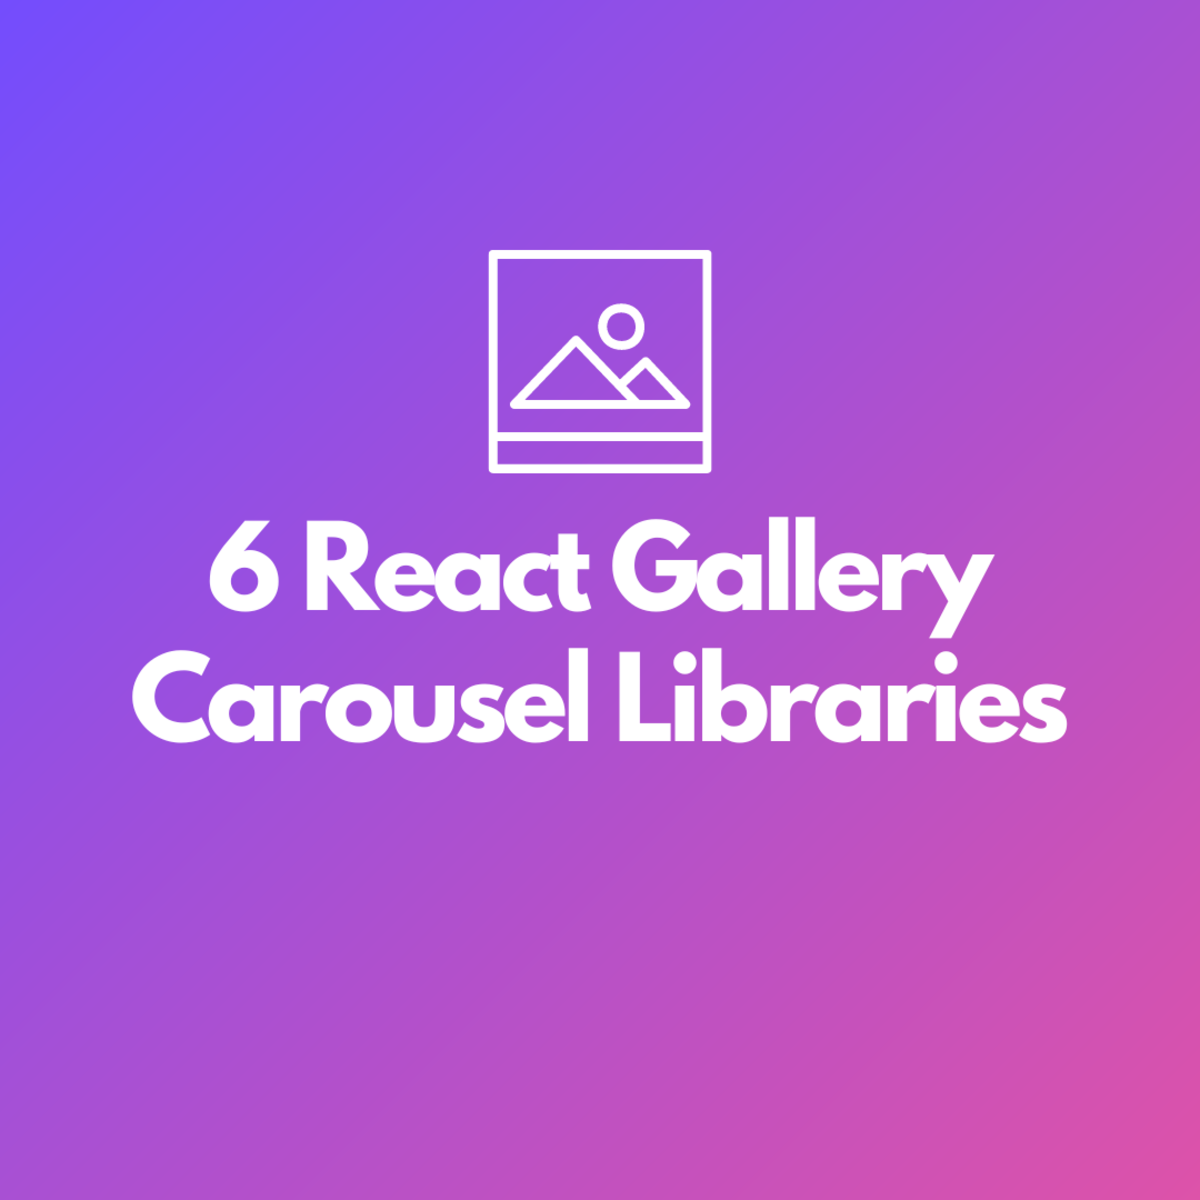 6 React Gallery Carousel Libraries to Check Out: The Ultimate List -  TurboFuture